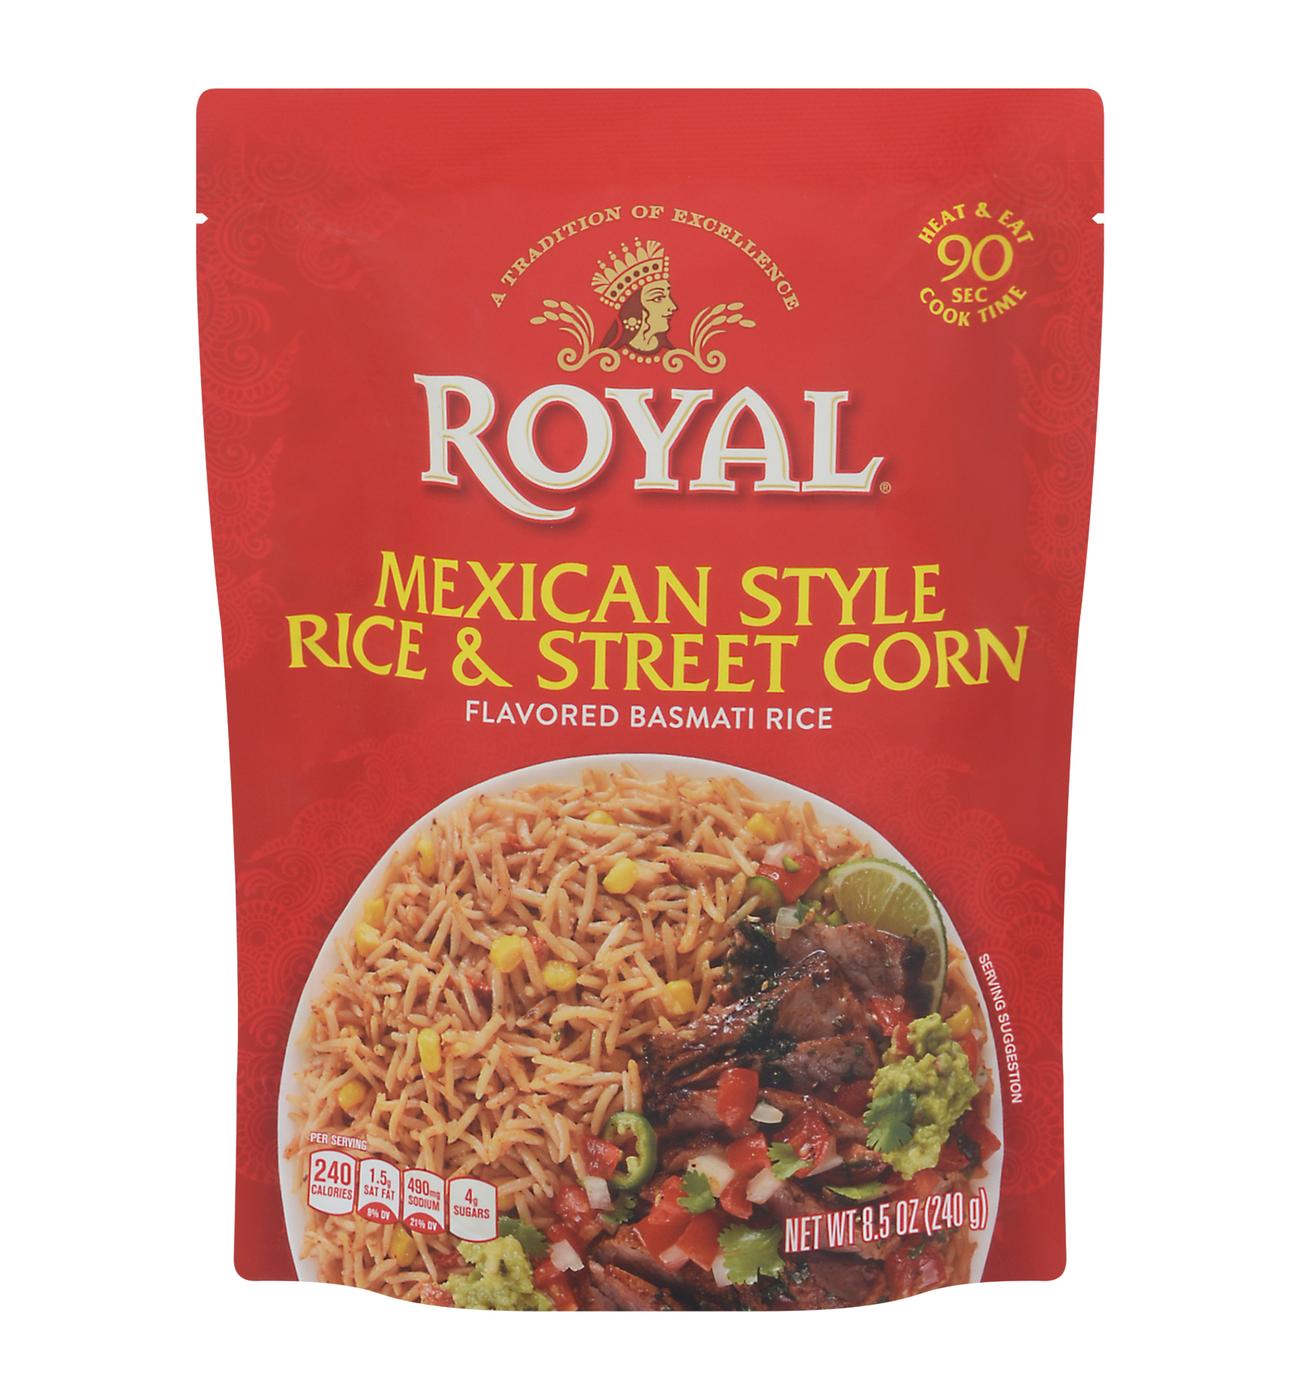 Royal Mexican Style Rice and Street Corn